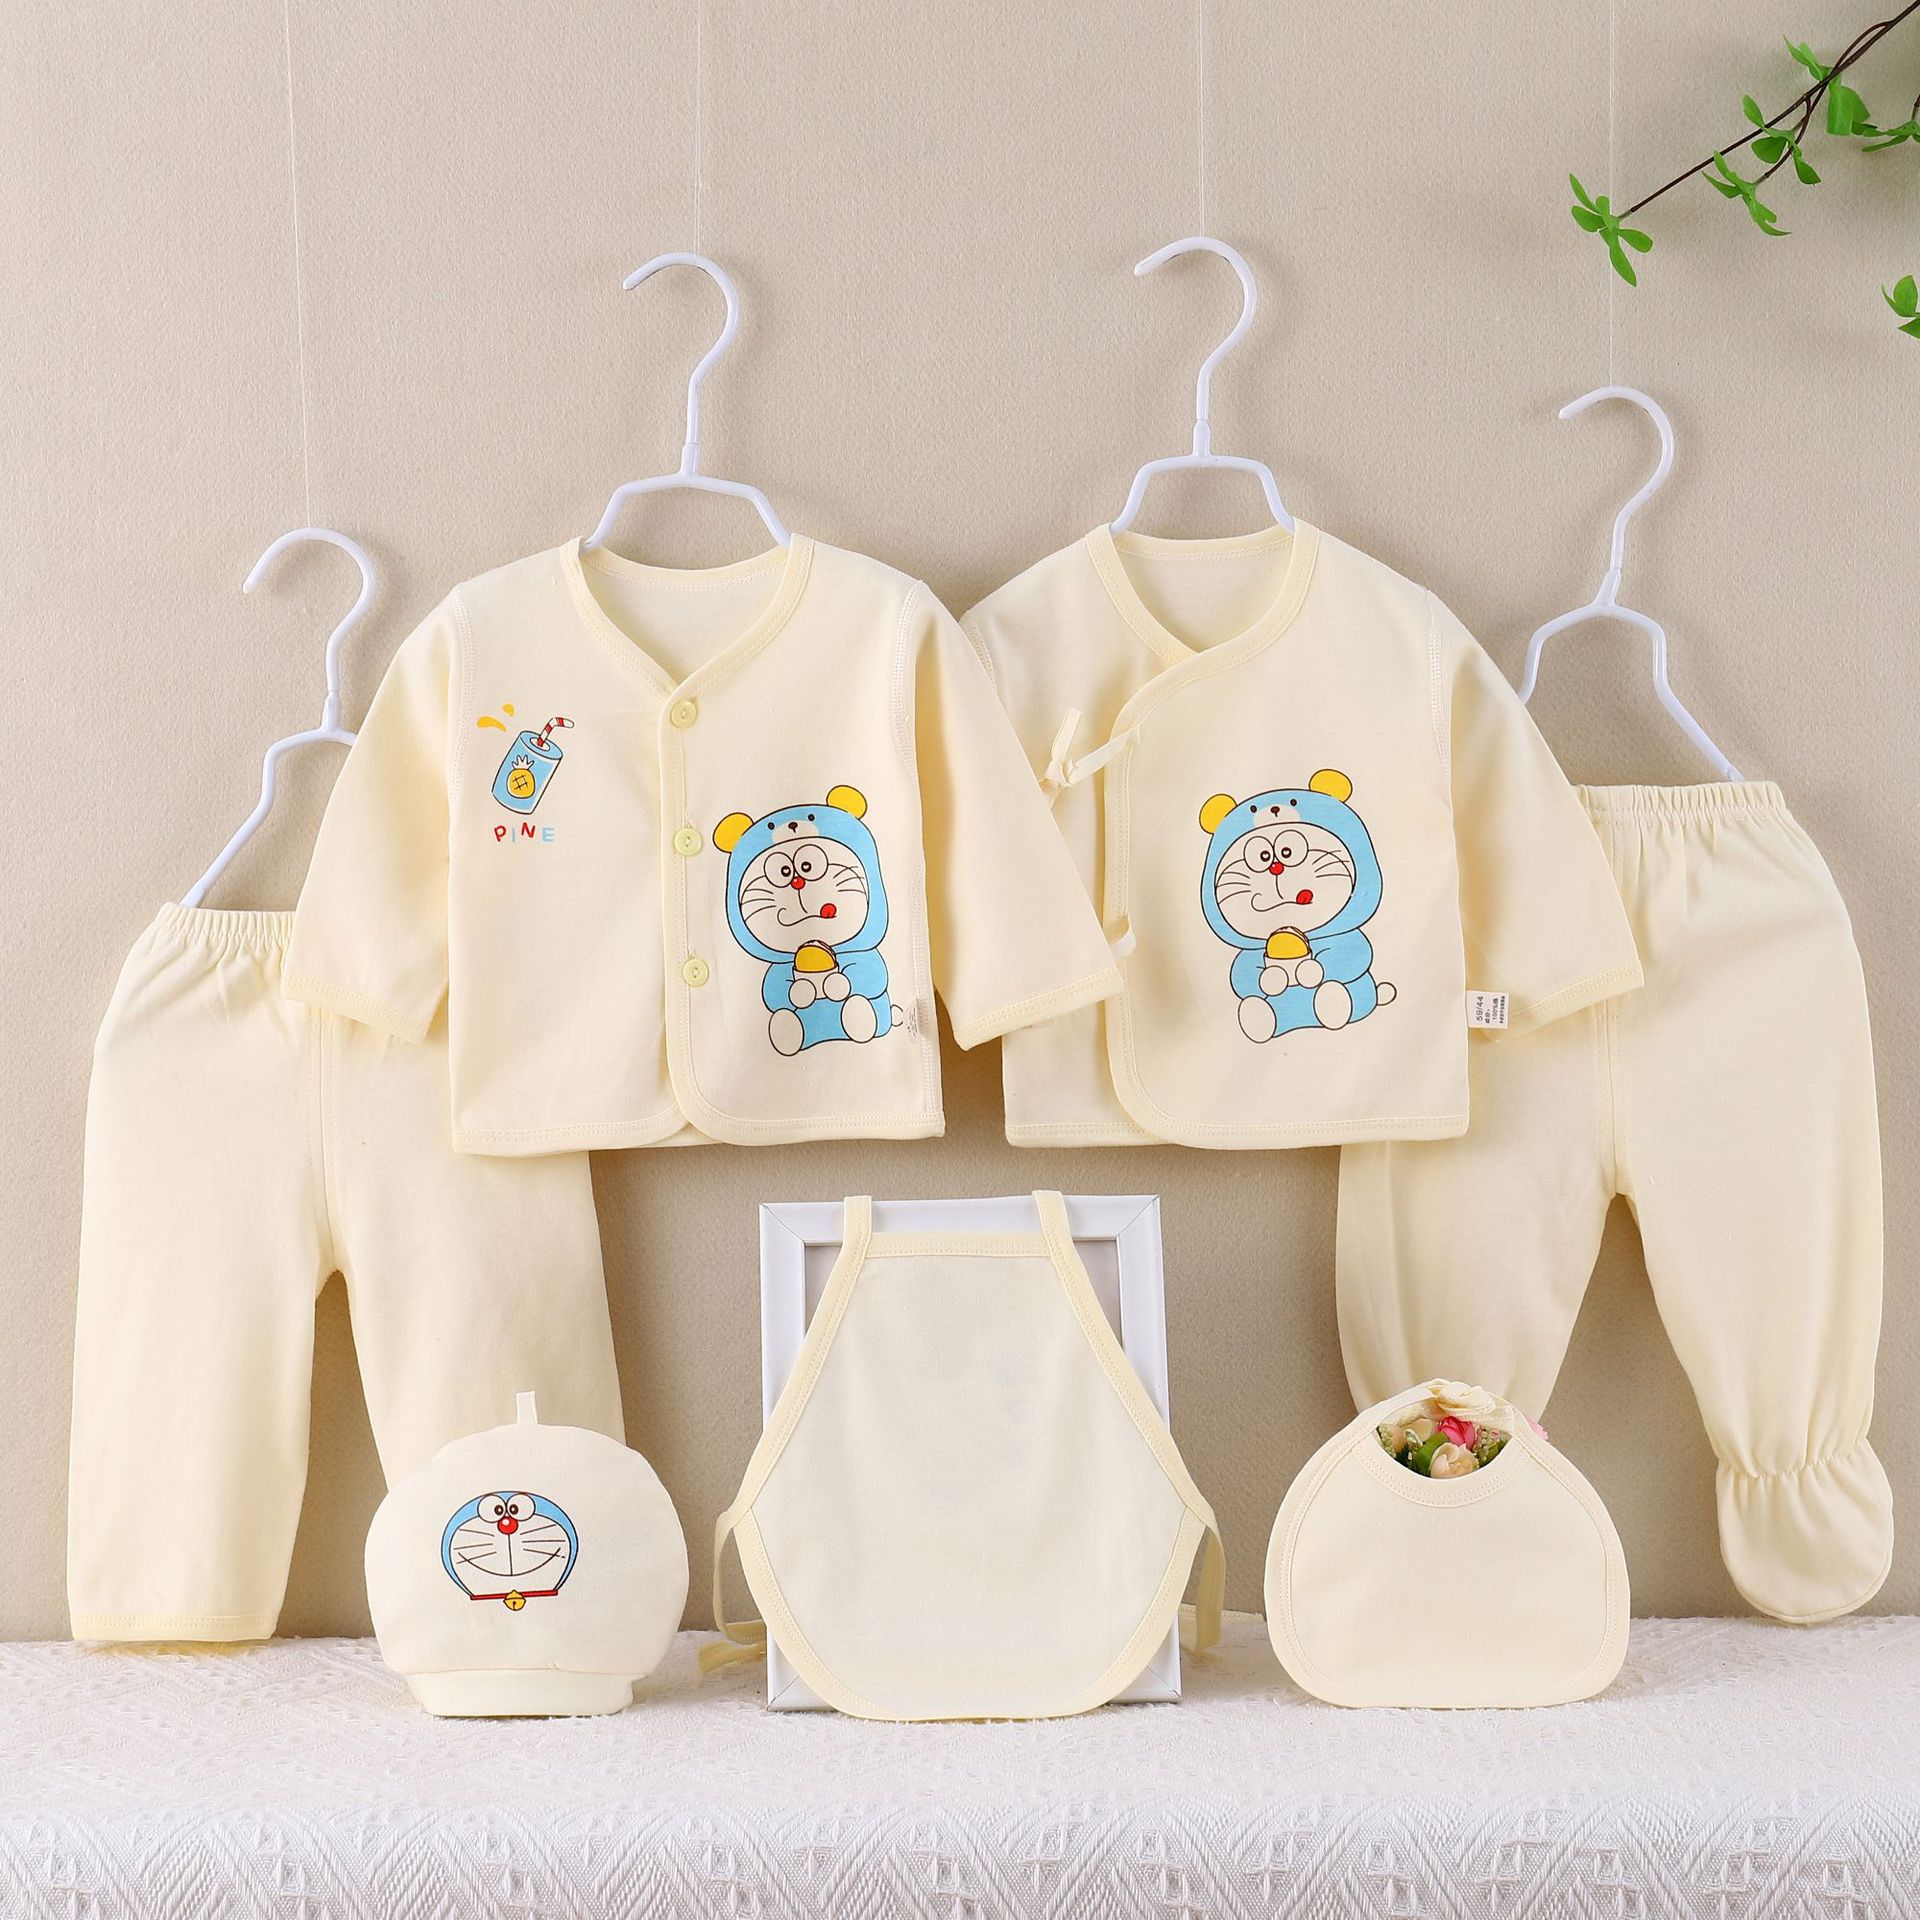 Newborn Boneless Cotton Clothes Baby 7 Pieces Suit 0-3 Months Spring, Autumn and Summer New Born Newly Born Baby Supplies